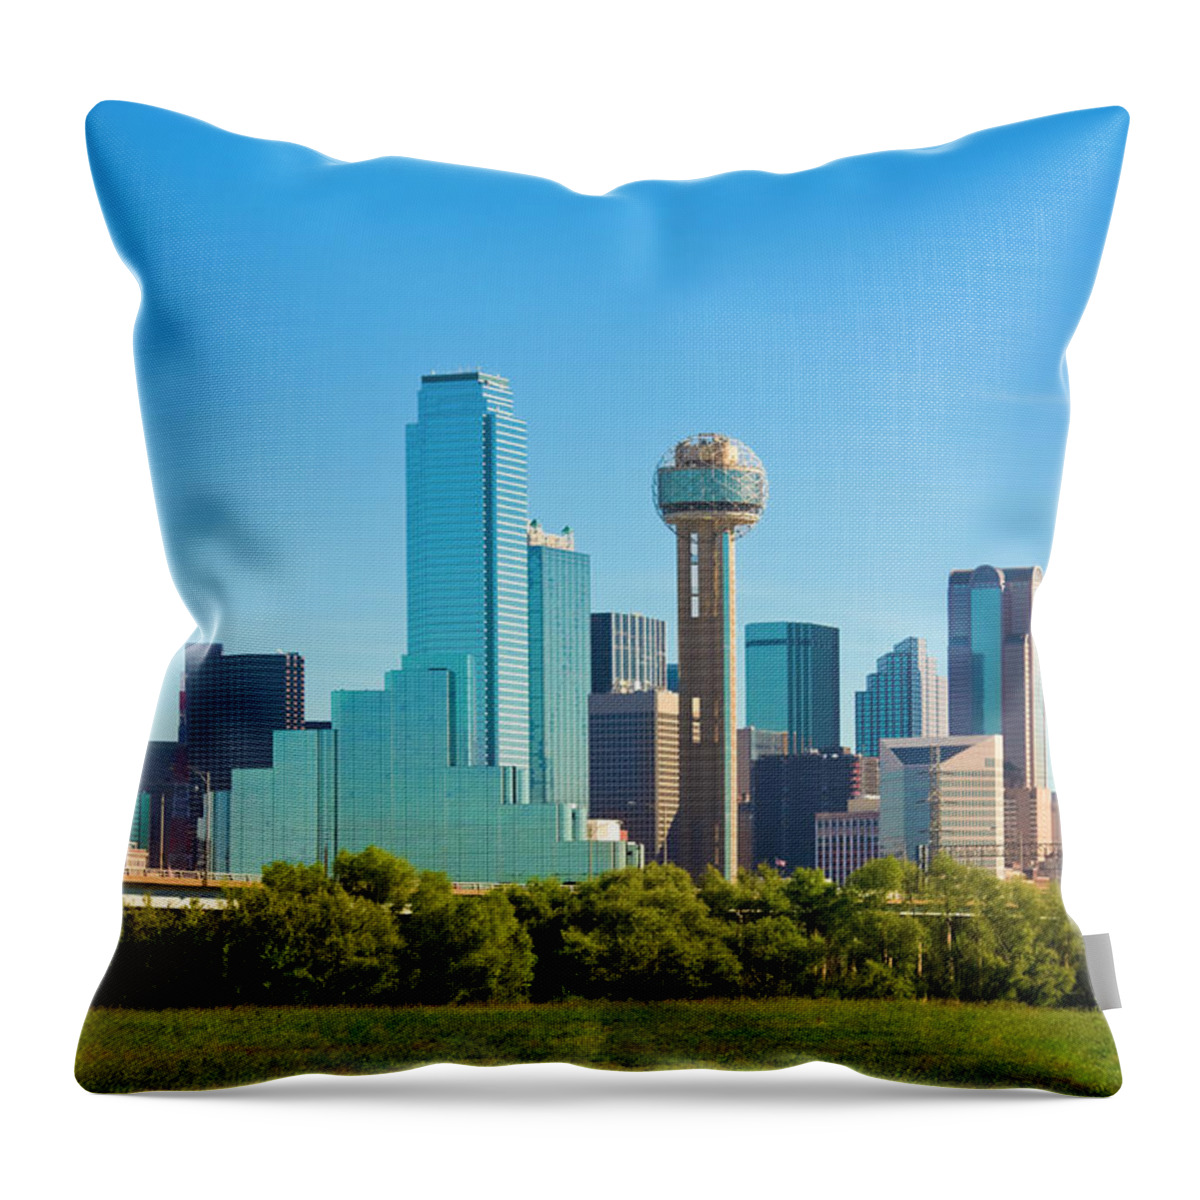 Scenics Throw Pillow featuring the photograph Dallas City Skyline, Texas by Dszc